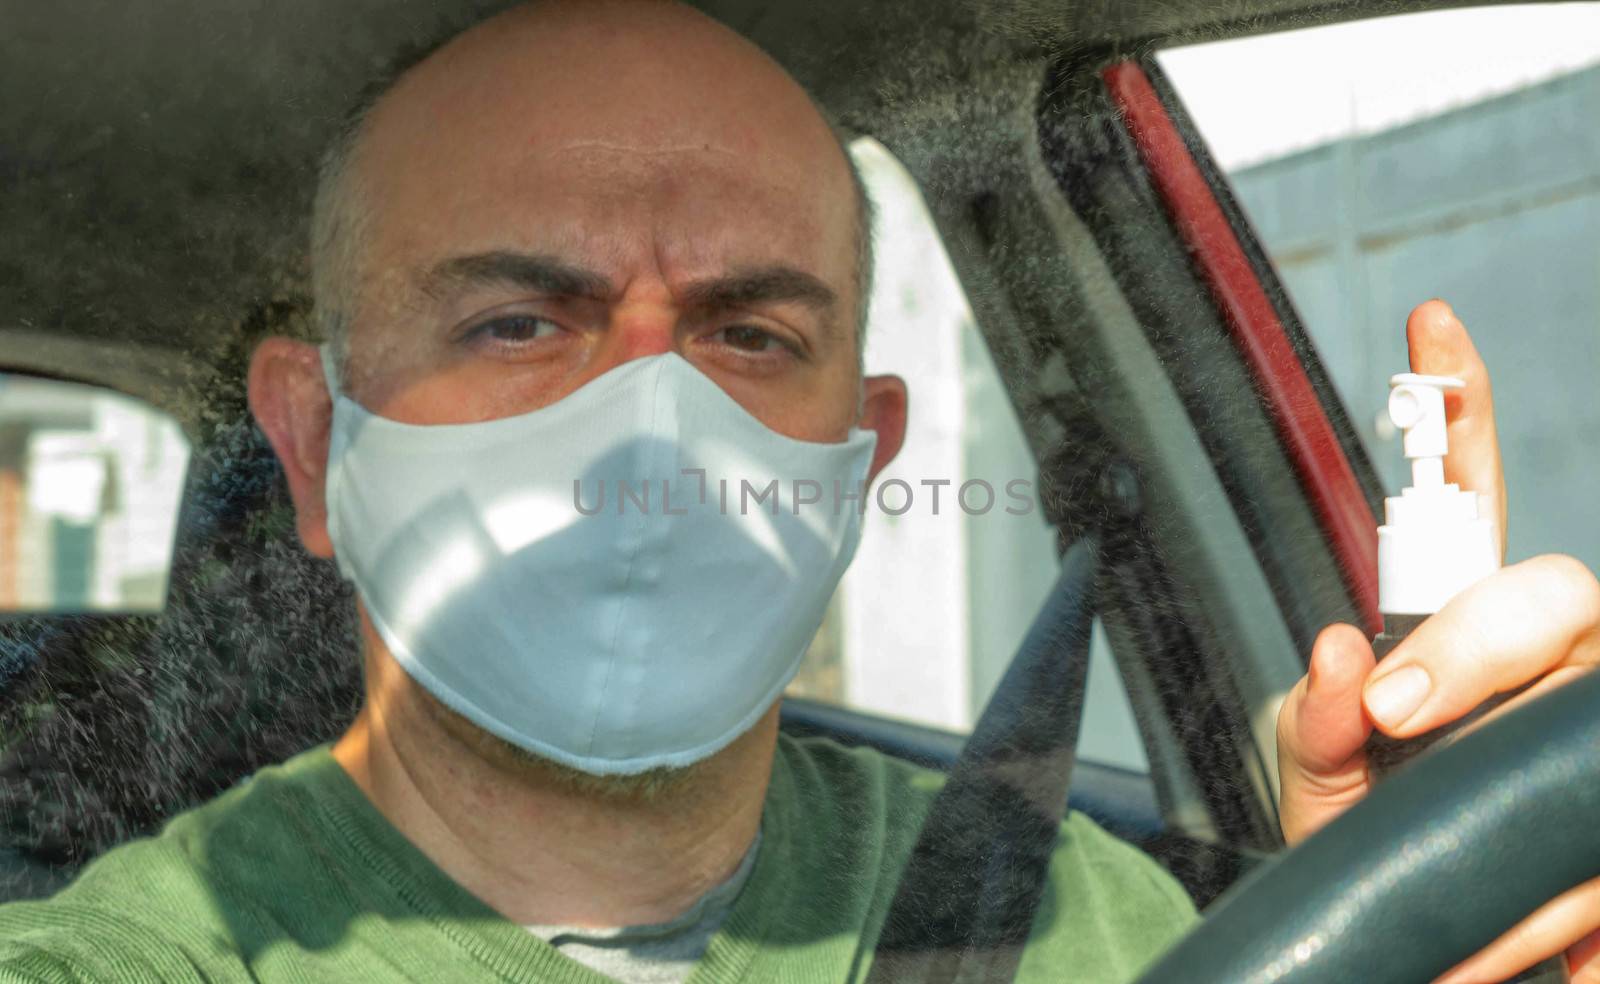 Turin, Piedmont, Italy. April 2020. Portrait of a Caucasian man driving the car wearing a white mask to avoid contagion. Mist alcohol to disinfect surfaces: droplets shine suspended in the air.